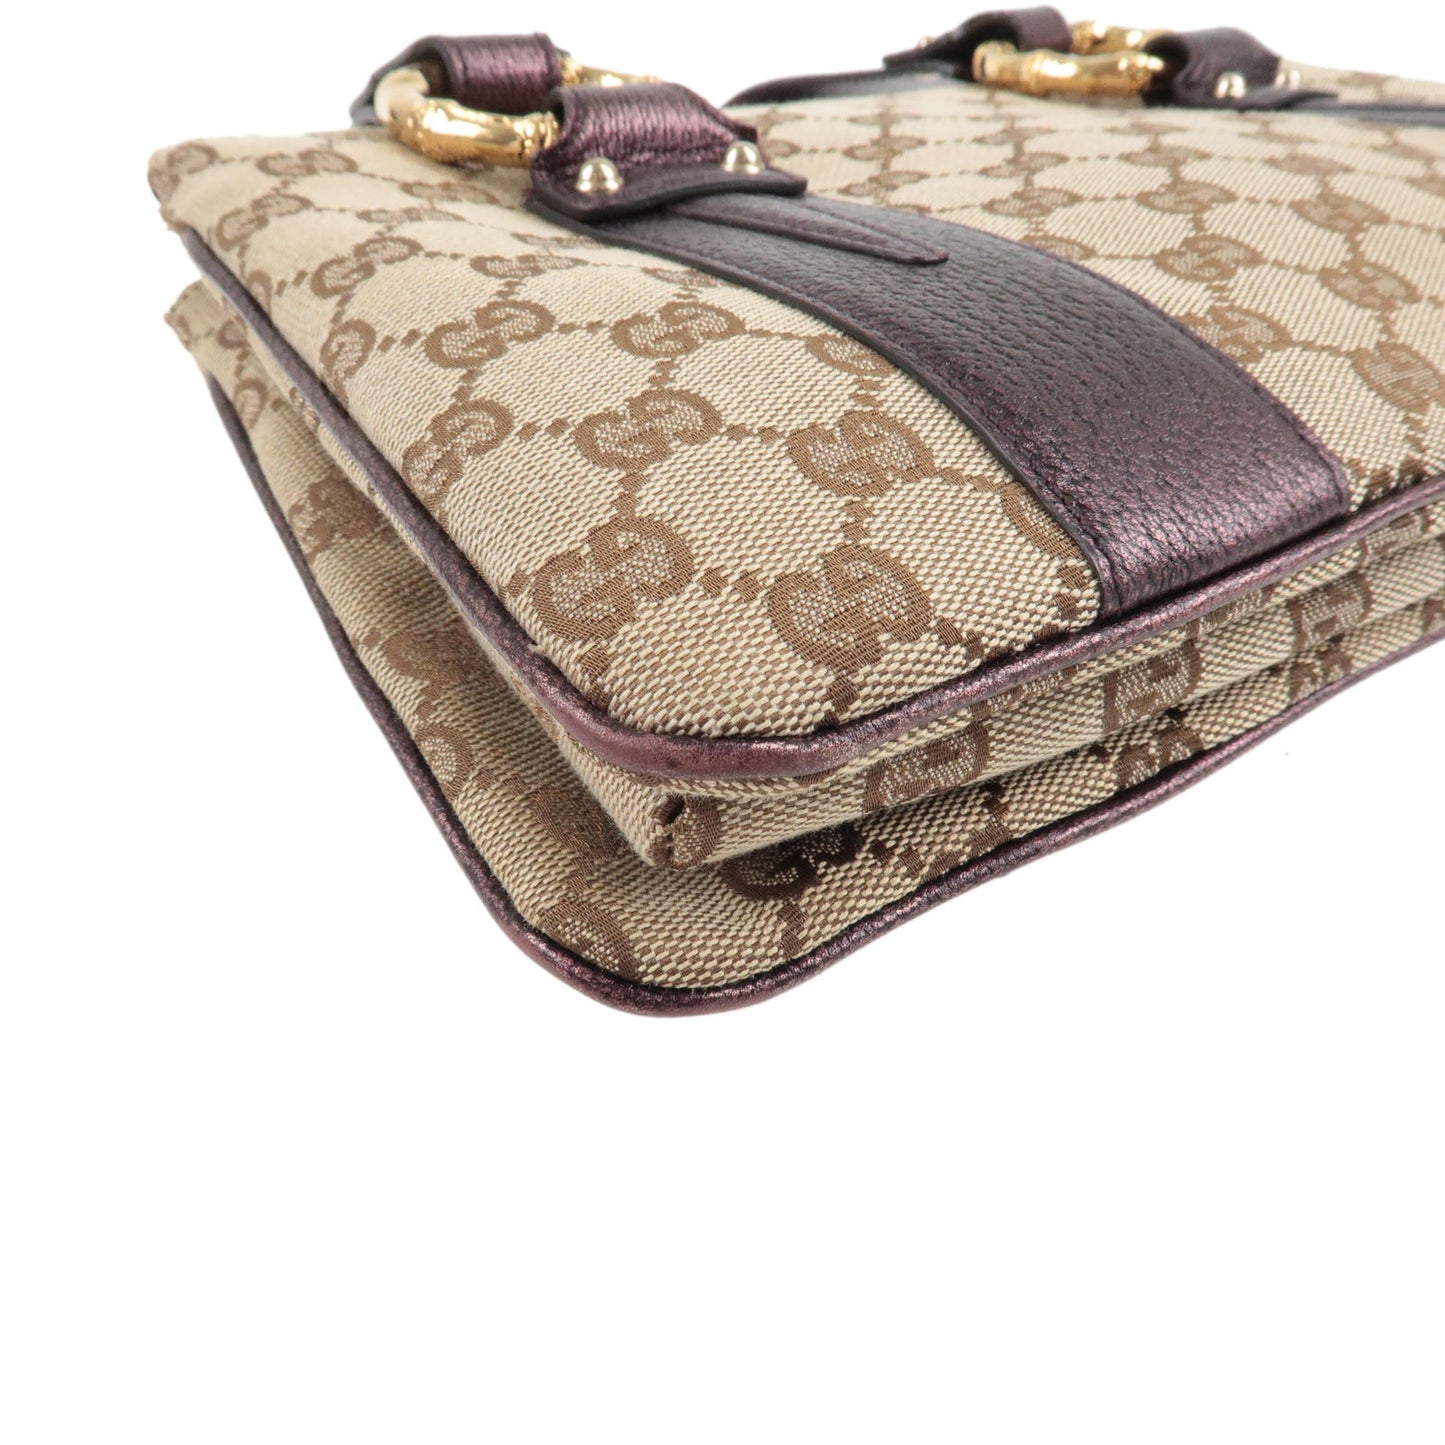 GUCCI GG Canvas Leather Hand Bag Purple Beige Brown 131324